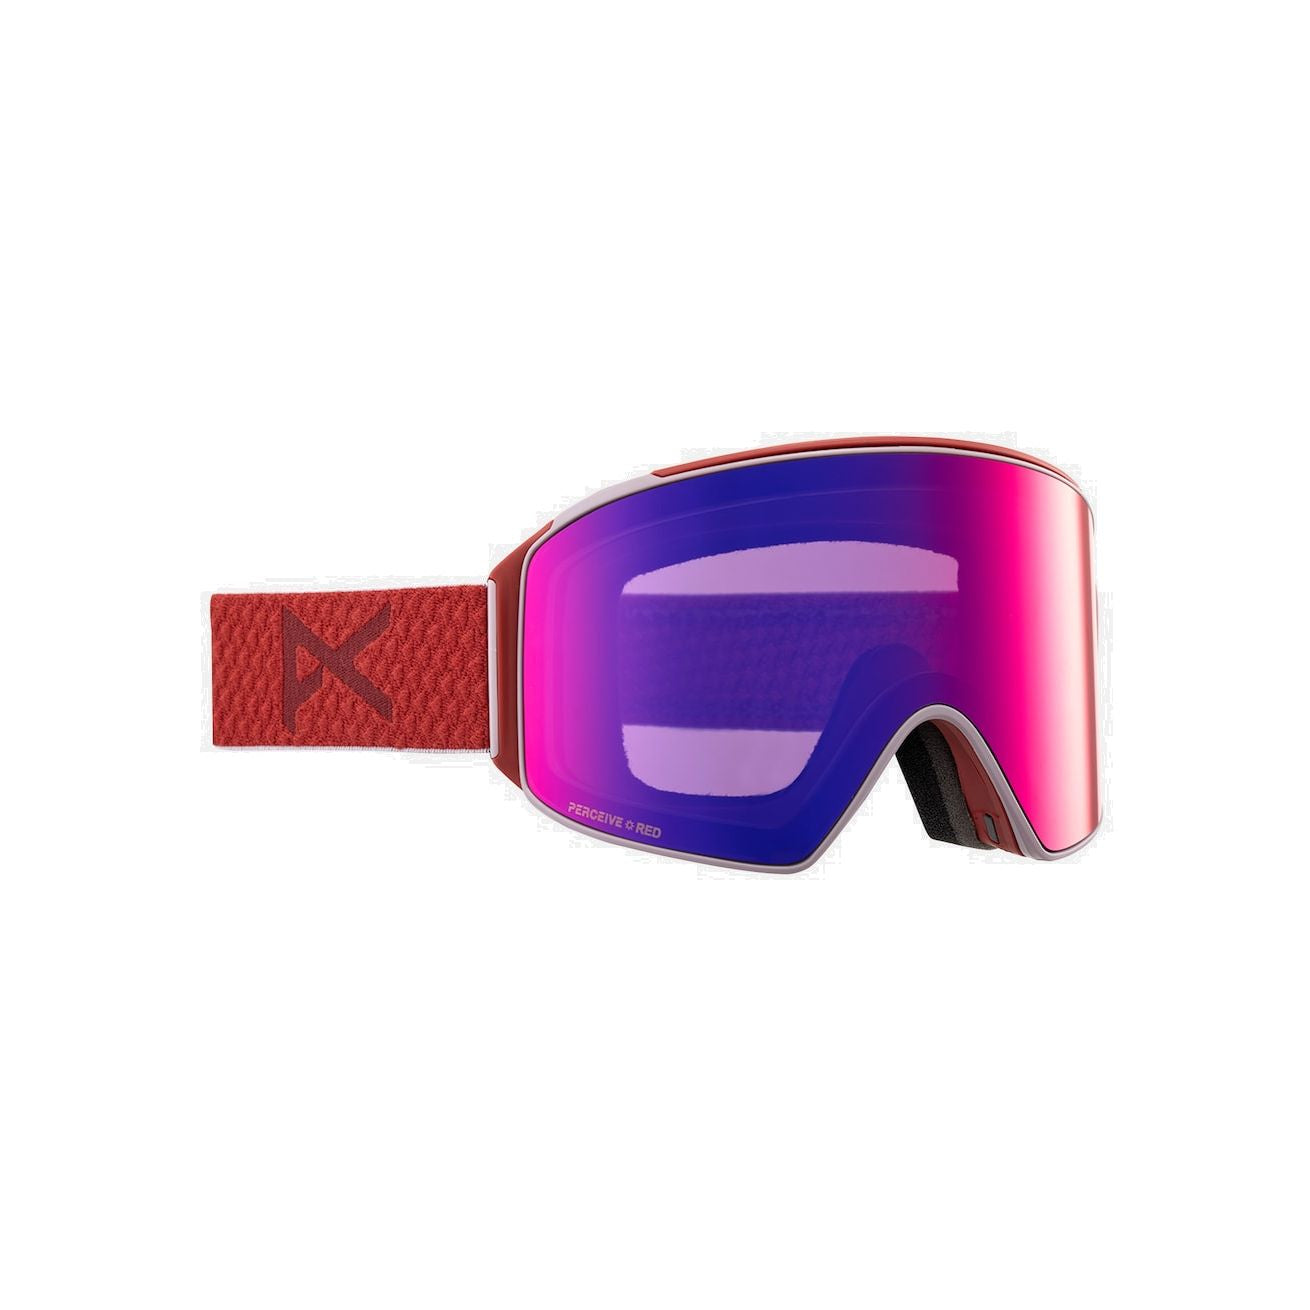 Anon M4 Cylindrical Goggles + Bonus Lens + MFI Face Mask - Low Bridge Fit - Openbox Mars Perceive Sunny Red - Anon Snow Goggles